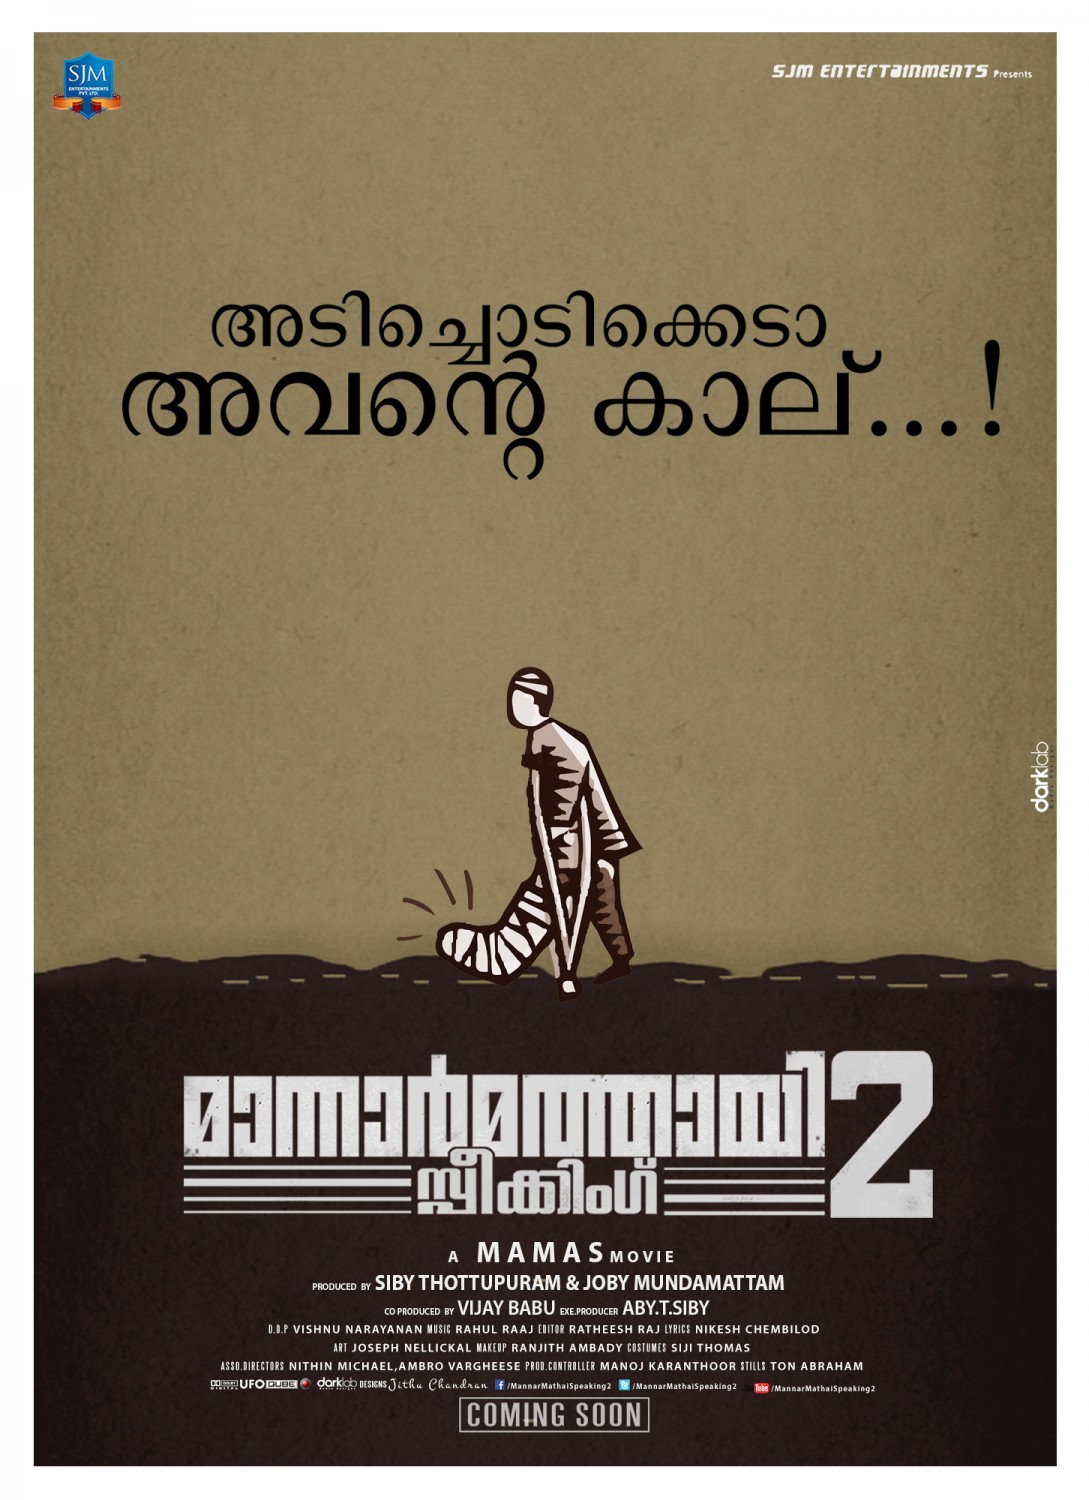 Extra Large Movie Poster Image for Mannar Mathai Speaking 2 (#4 of 29)